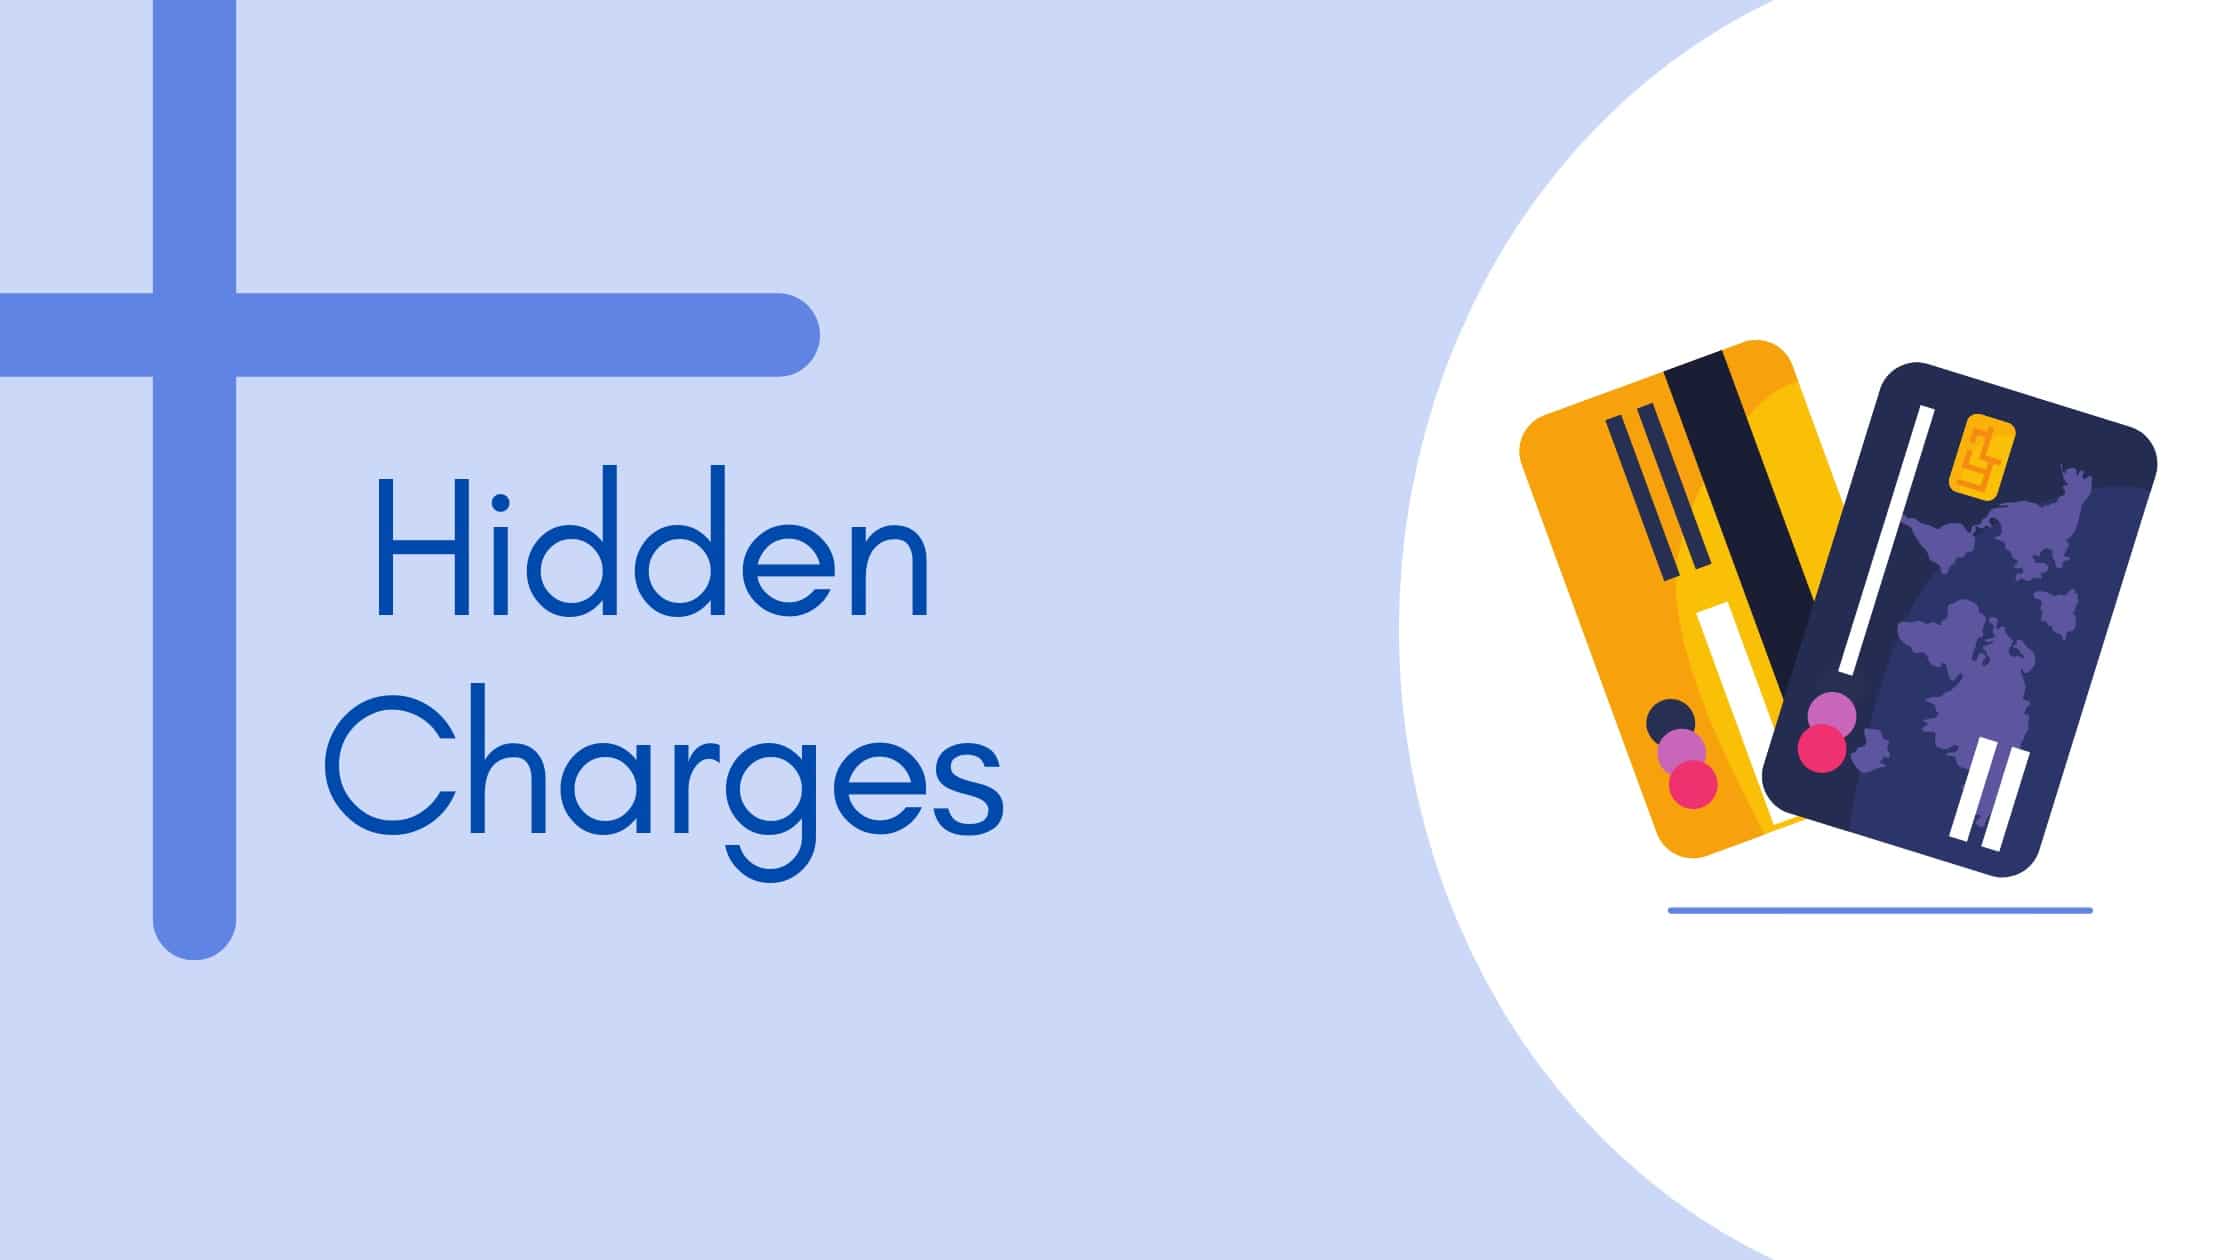 Fees (Hidden charges)